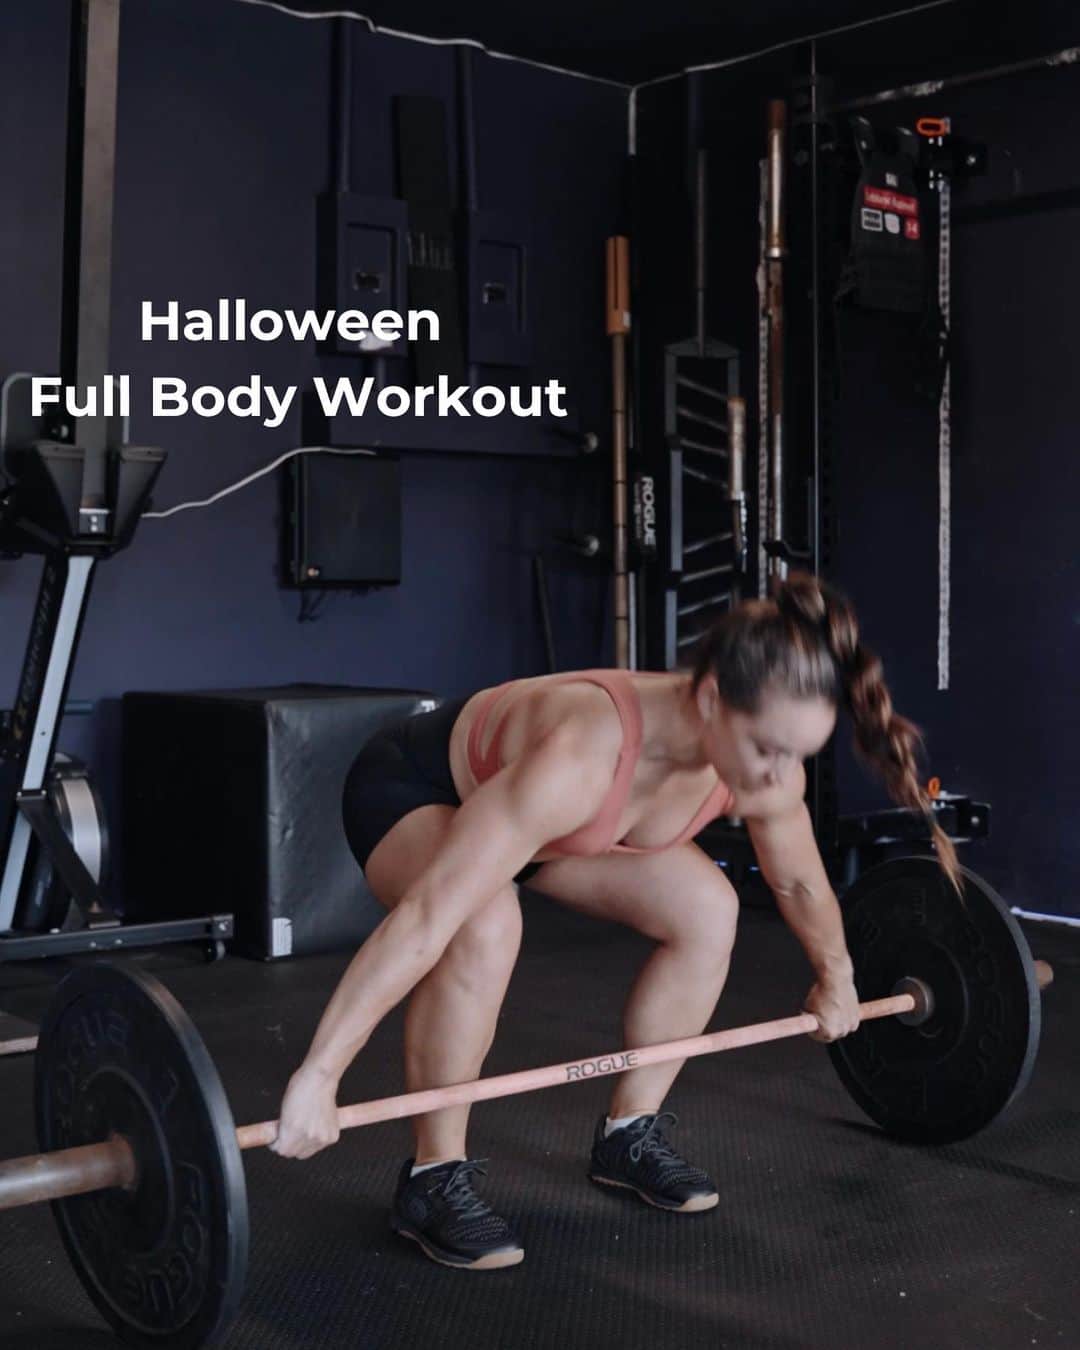 Camille Leblanc-Bazinetのインスタグラム：「Halloween Special 🎃  ✅ Part 1 Bats Resurrection  Lateral Raise Set 1: 15 smooth repetitions  Set 2: 12 repetitions with 3 sec down  Set 3: 10 Heavy repetitions with 2 sec down  Set 4: 3 times through x 4 full repetitions into 4 half repetitions through the bottom  Set 5: 10 Heavy repetitions, drop 30% load, 10 repetitions, drop 30% load, max repetitions  Rest 90 sec-2 minutes between set  ✅Part 2:  Witch Craft  3 sets 60 sec incline press 2 sec up/ 2 sec down  directly into 12 dips 2 sec negative  directly into max push-press (same load use for the incline press  rest 90 sec between sets  ✅ A Grave Situation  3 rounds 20 pull-ups 20 box jump over 20 thrusters  rest 2 minutes  3 rounds 20 burpees over the bar 20 power snatches   🚨 Build program 🚨  Check it out at ferocefitness.com  Make sure to tag me in this workout it was such a blast to do」